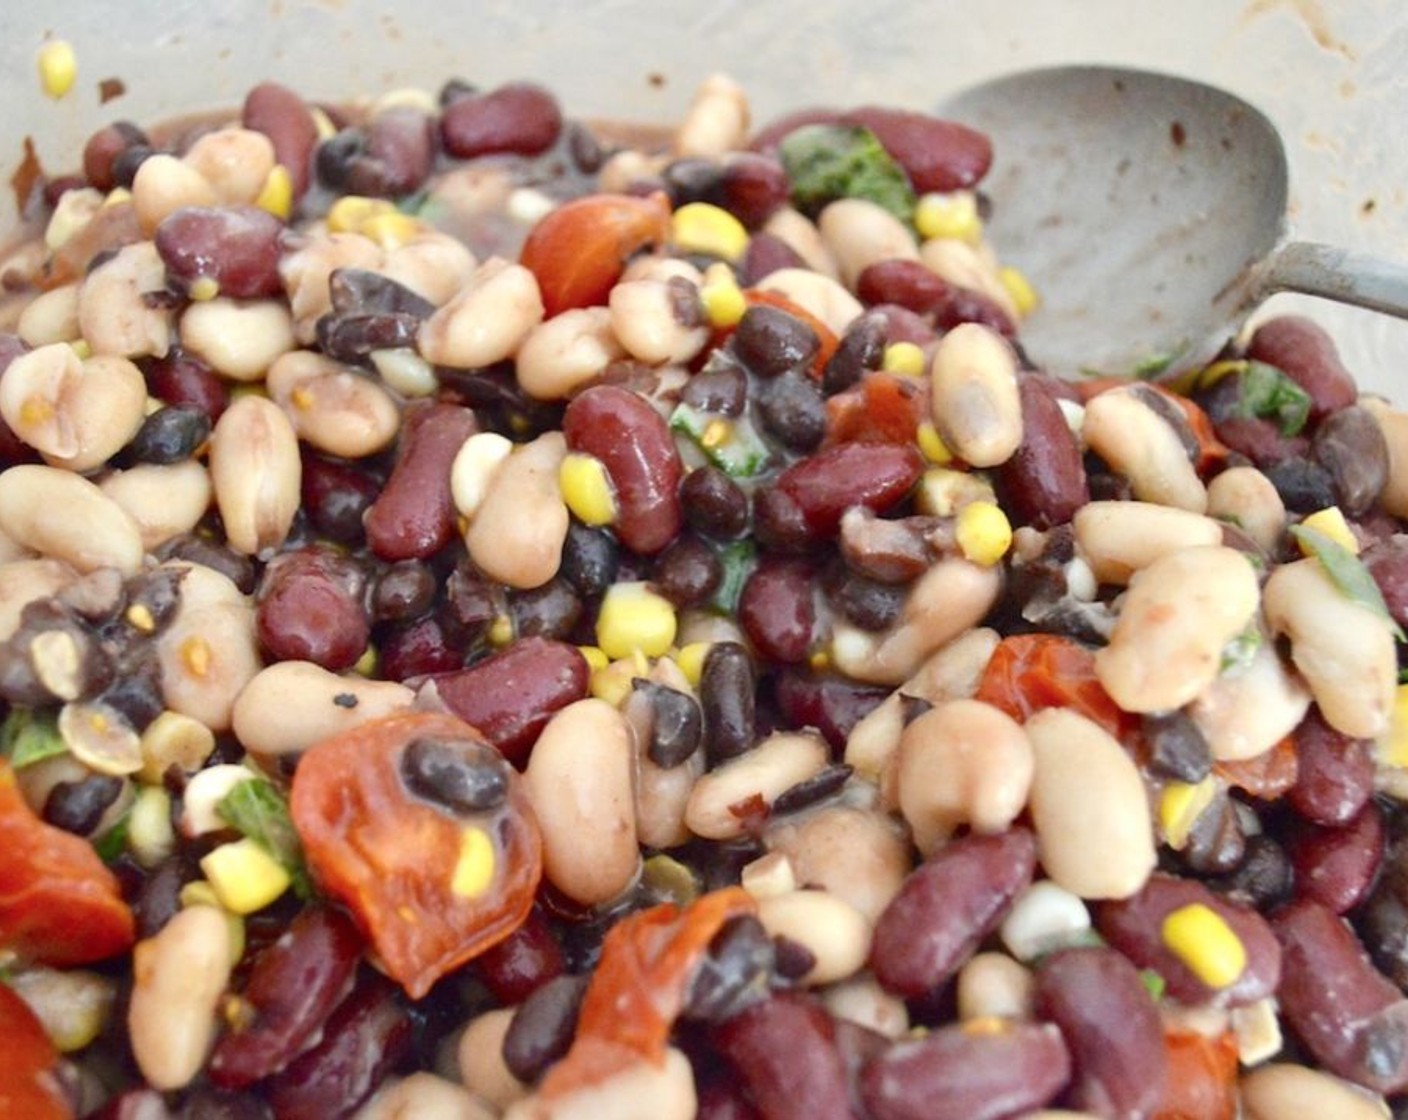 step 3 When they are done, combine them in a large bowl with White Beans (1 can), Red Kidney Beans (1 can), Black Beans (1 can), Fresh Basil Leaves (3), and juice from the Lemons (2). Toss the salad together thoroughly, then let chill for an hour at least in the refrigerator.